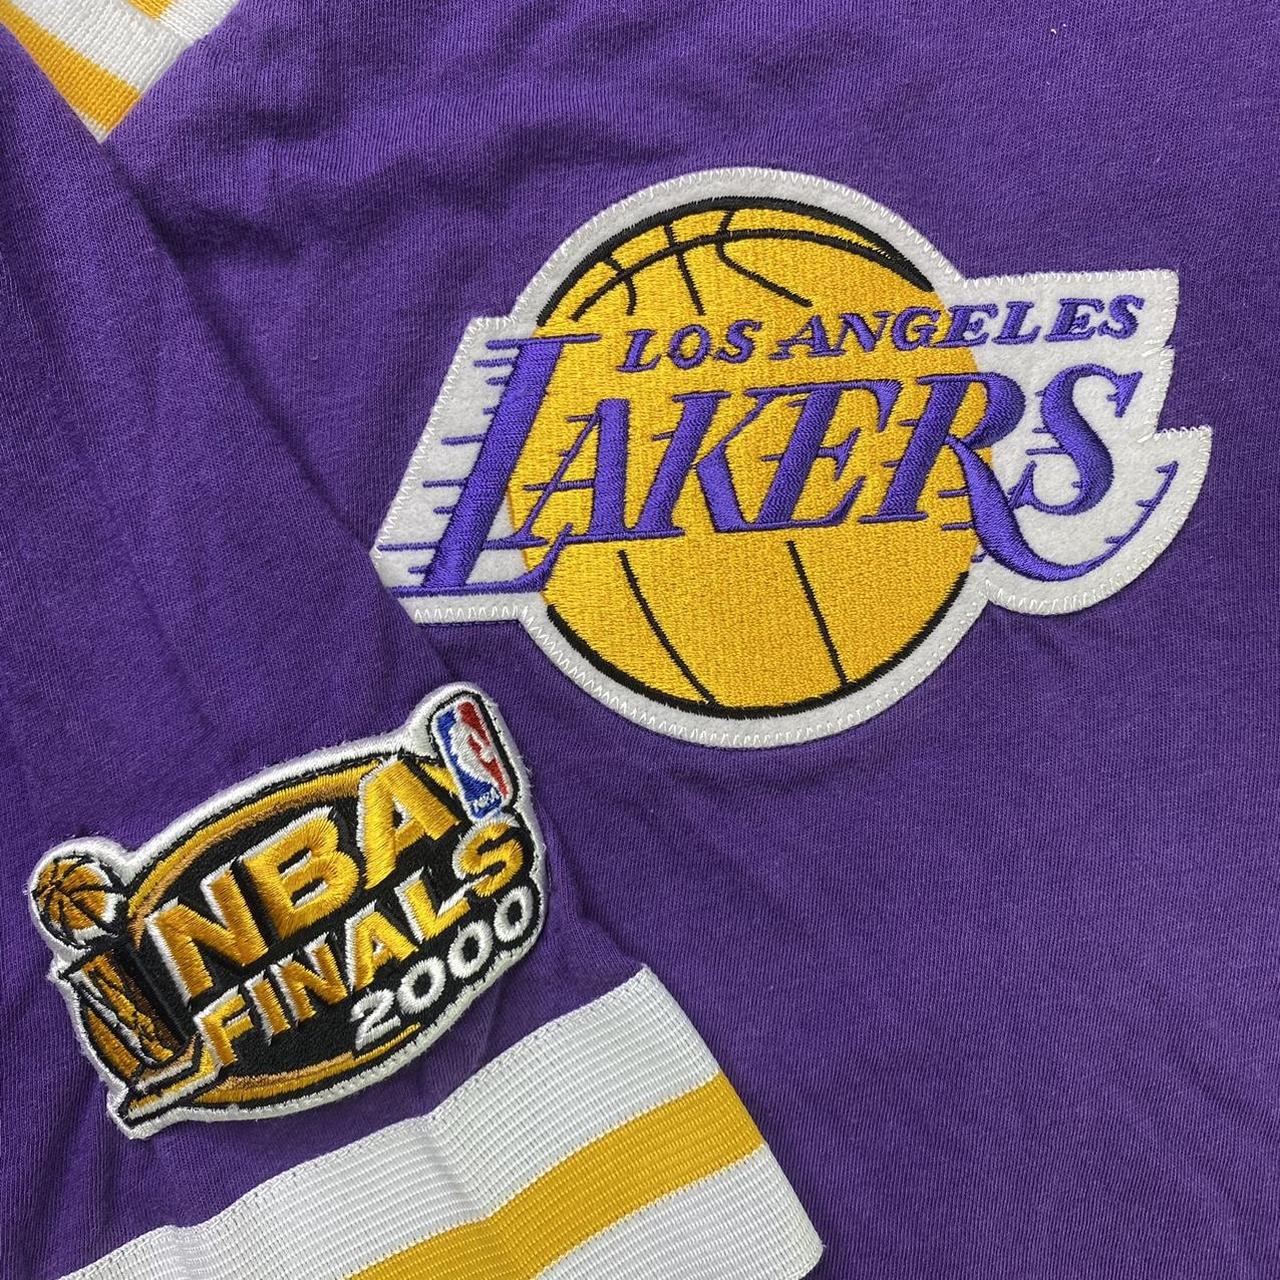 NBA Mitchell & Ness Los Angeles Lakers Jersey 2000 NBA Finals